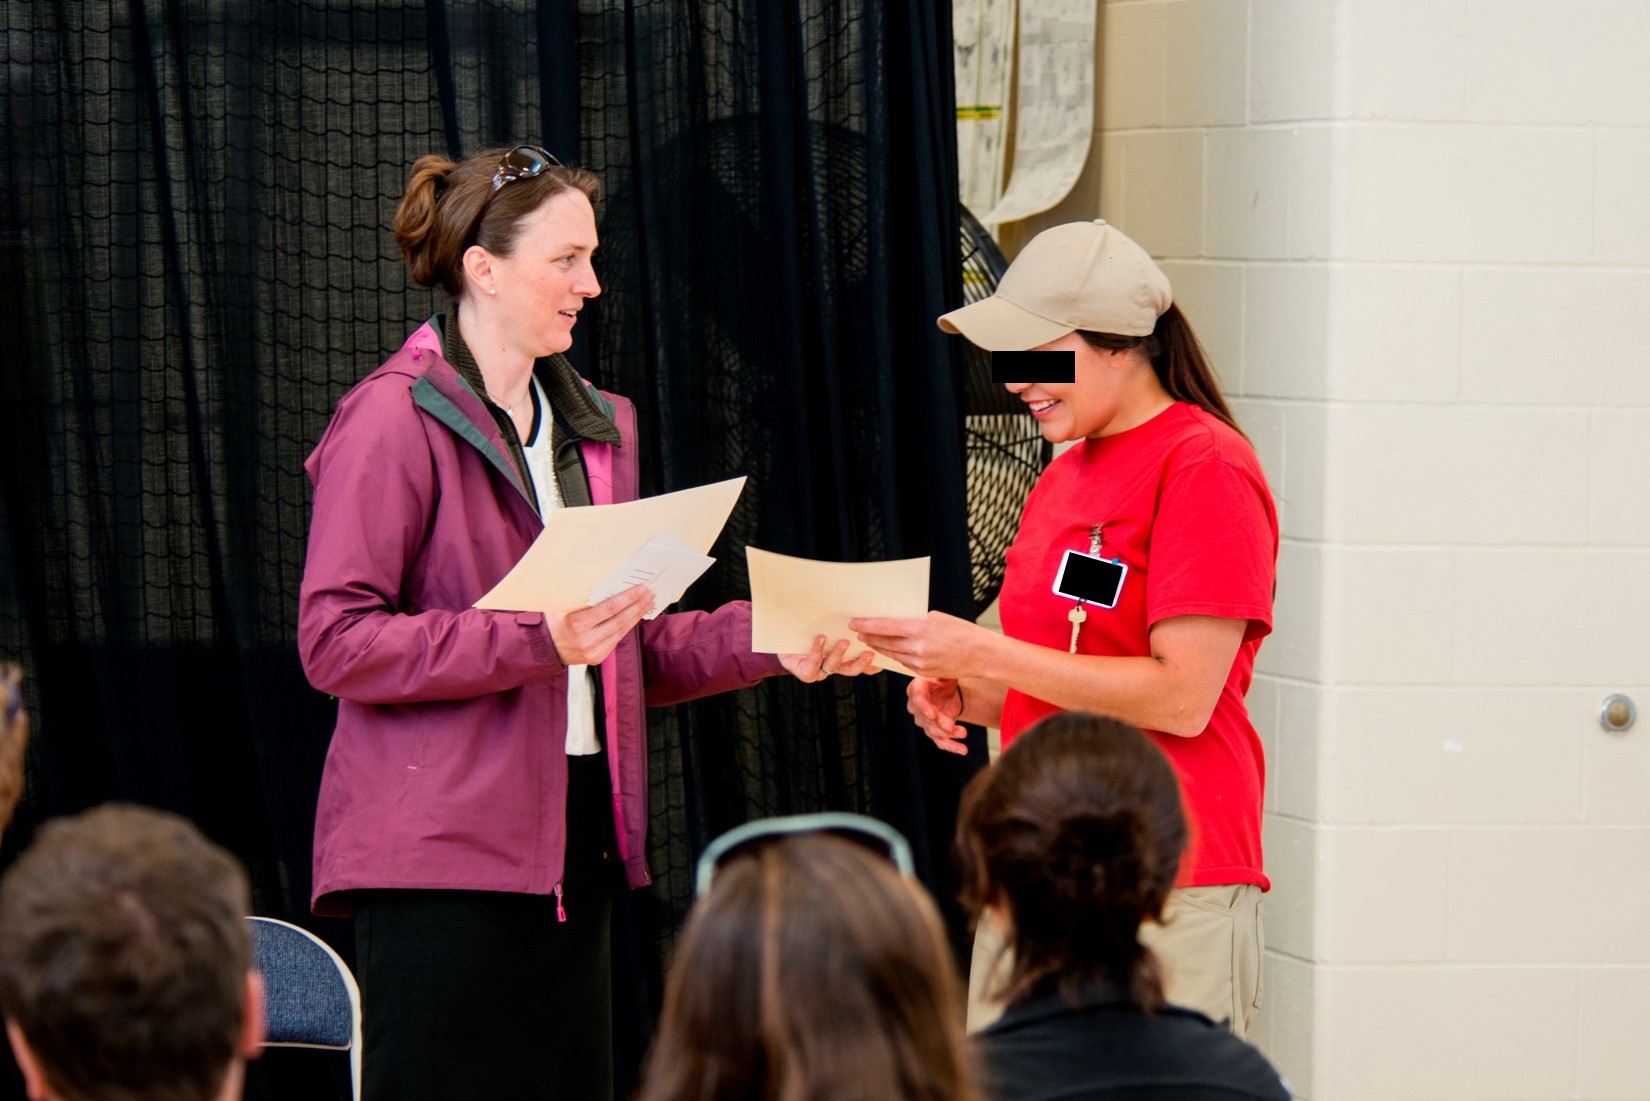 Dr. Carri LeRoy presents a certificate to an incarcerated student at the Washington Correctional Center for Women in Gig Harbor, WA. 